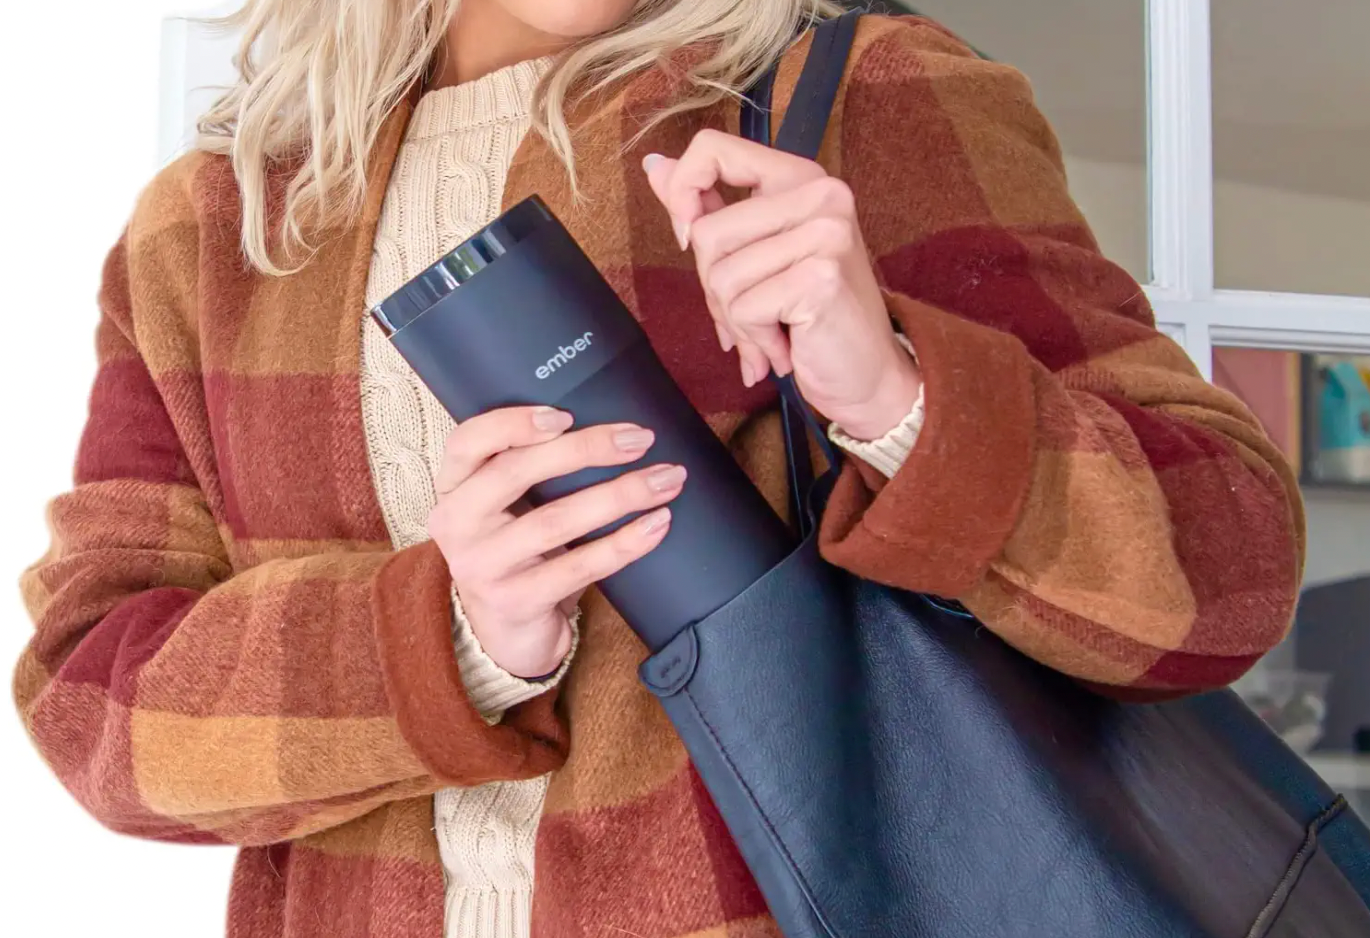 An image showing a woman putting an Ember Temperature Control Travel Mug into her bag